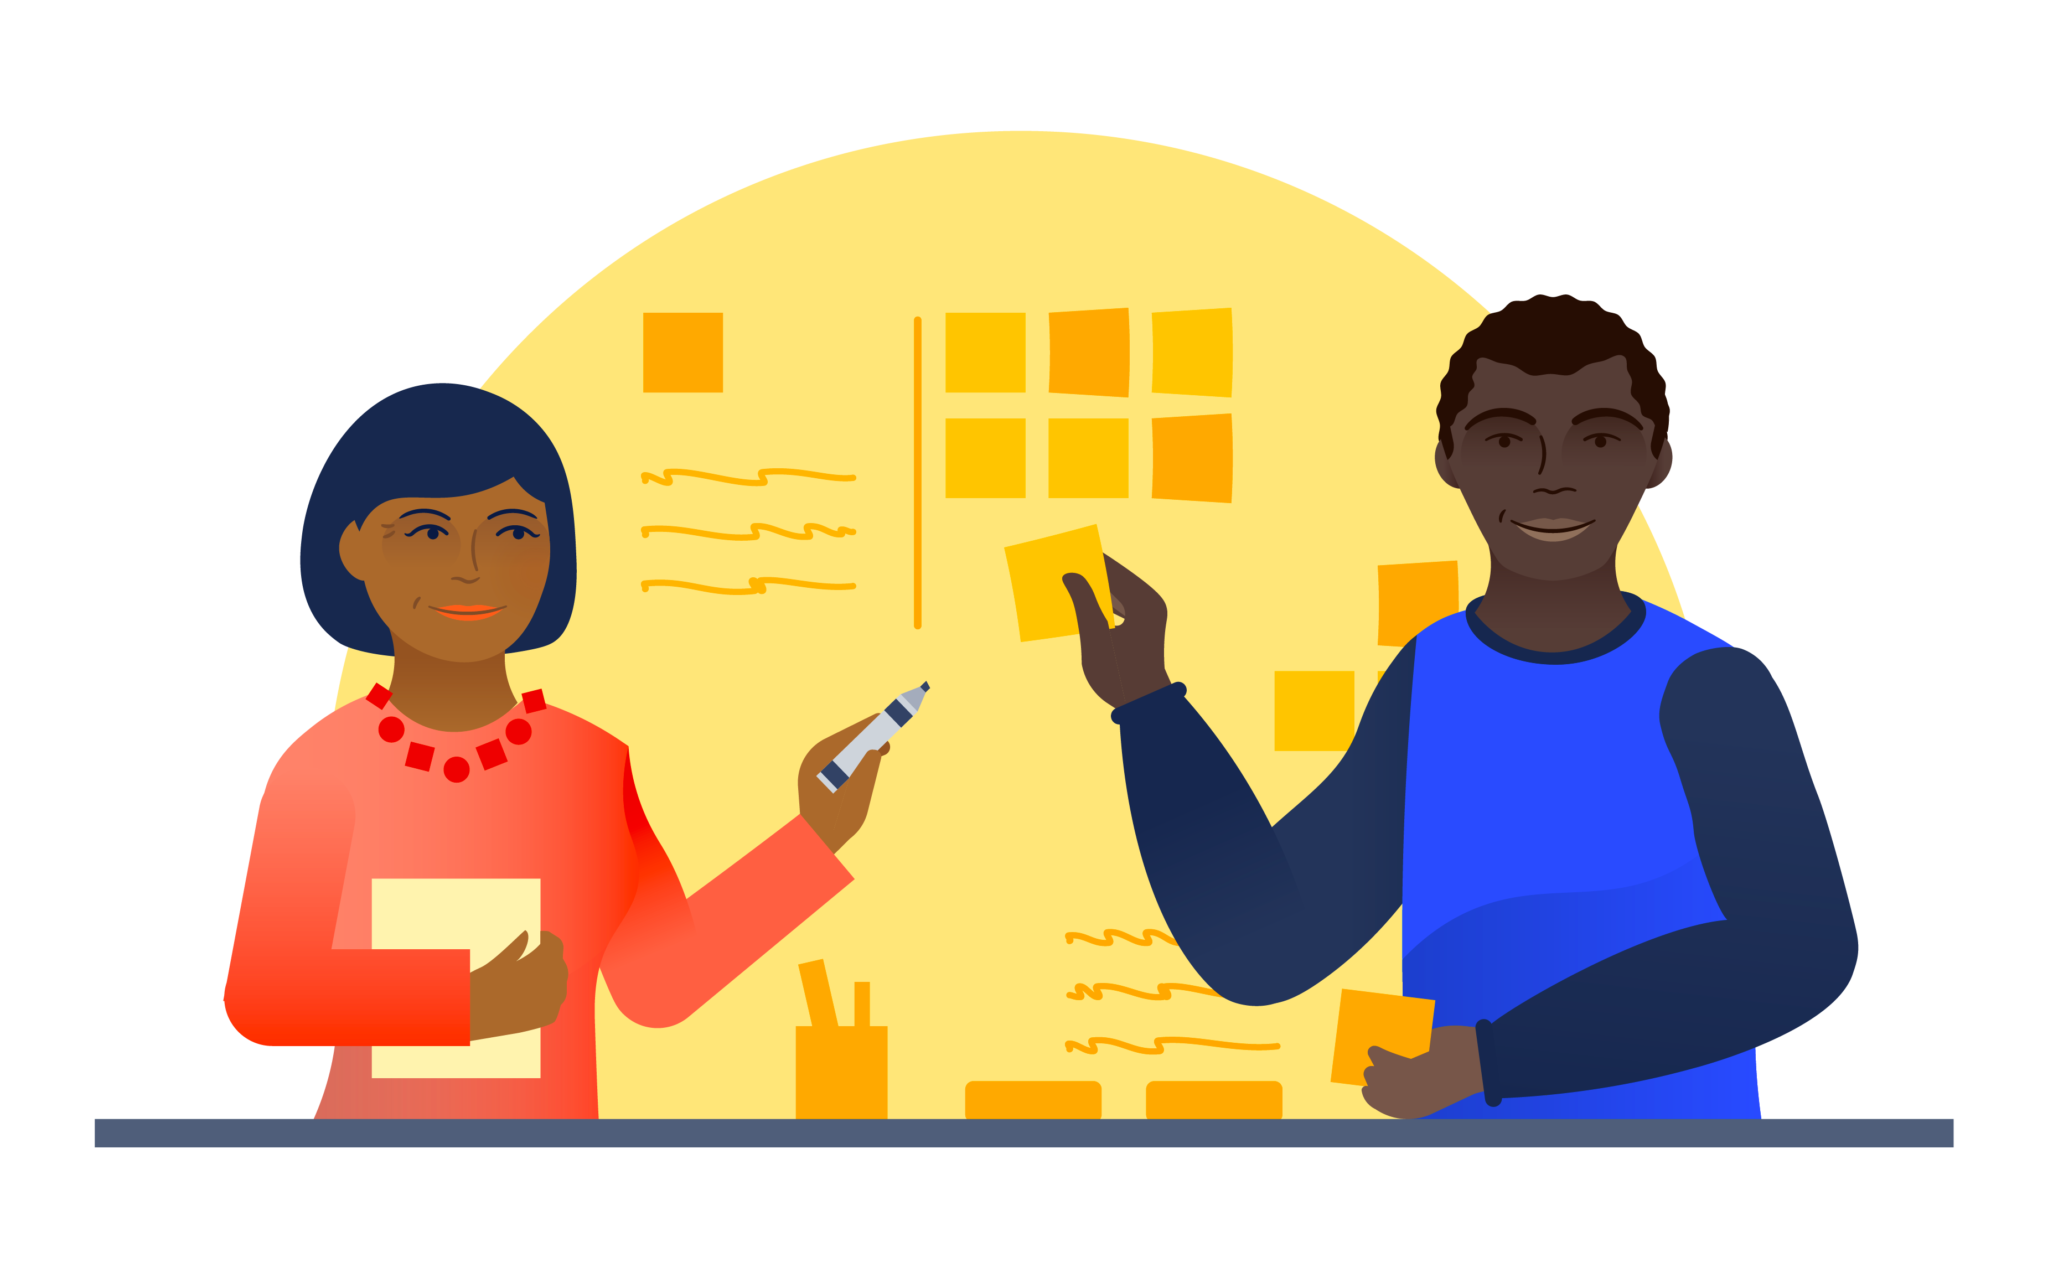 Illustration of two coworkers collaborating on a board